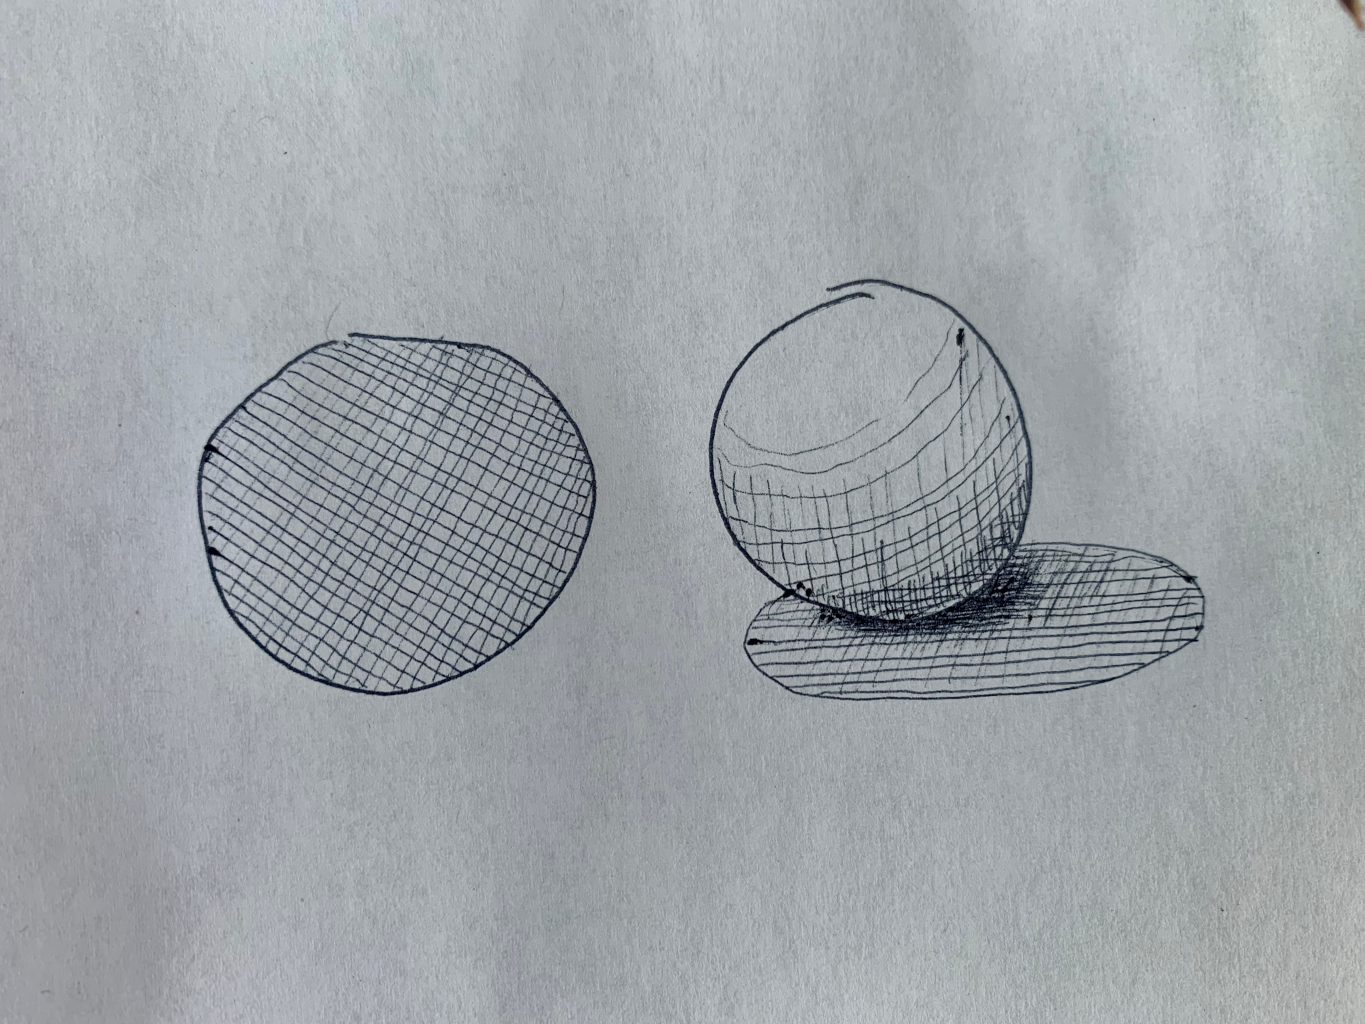 Two shaded circles, one shaded flat and the other to show sphere-like shadows